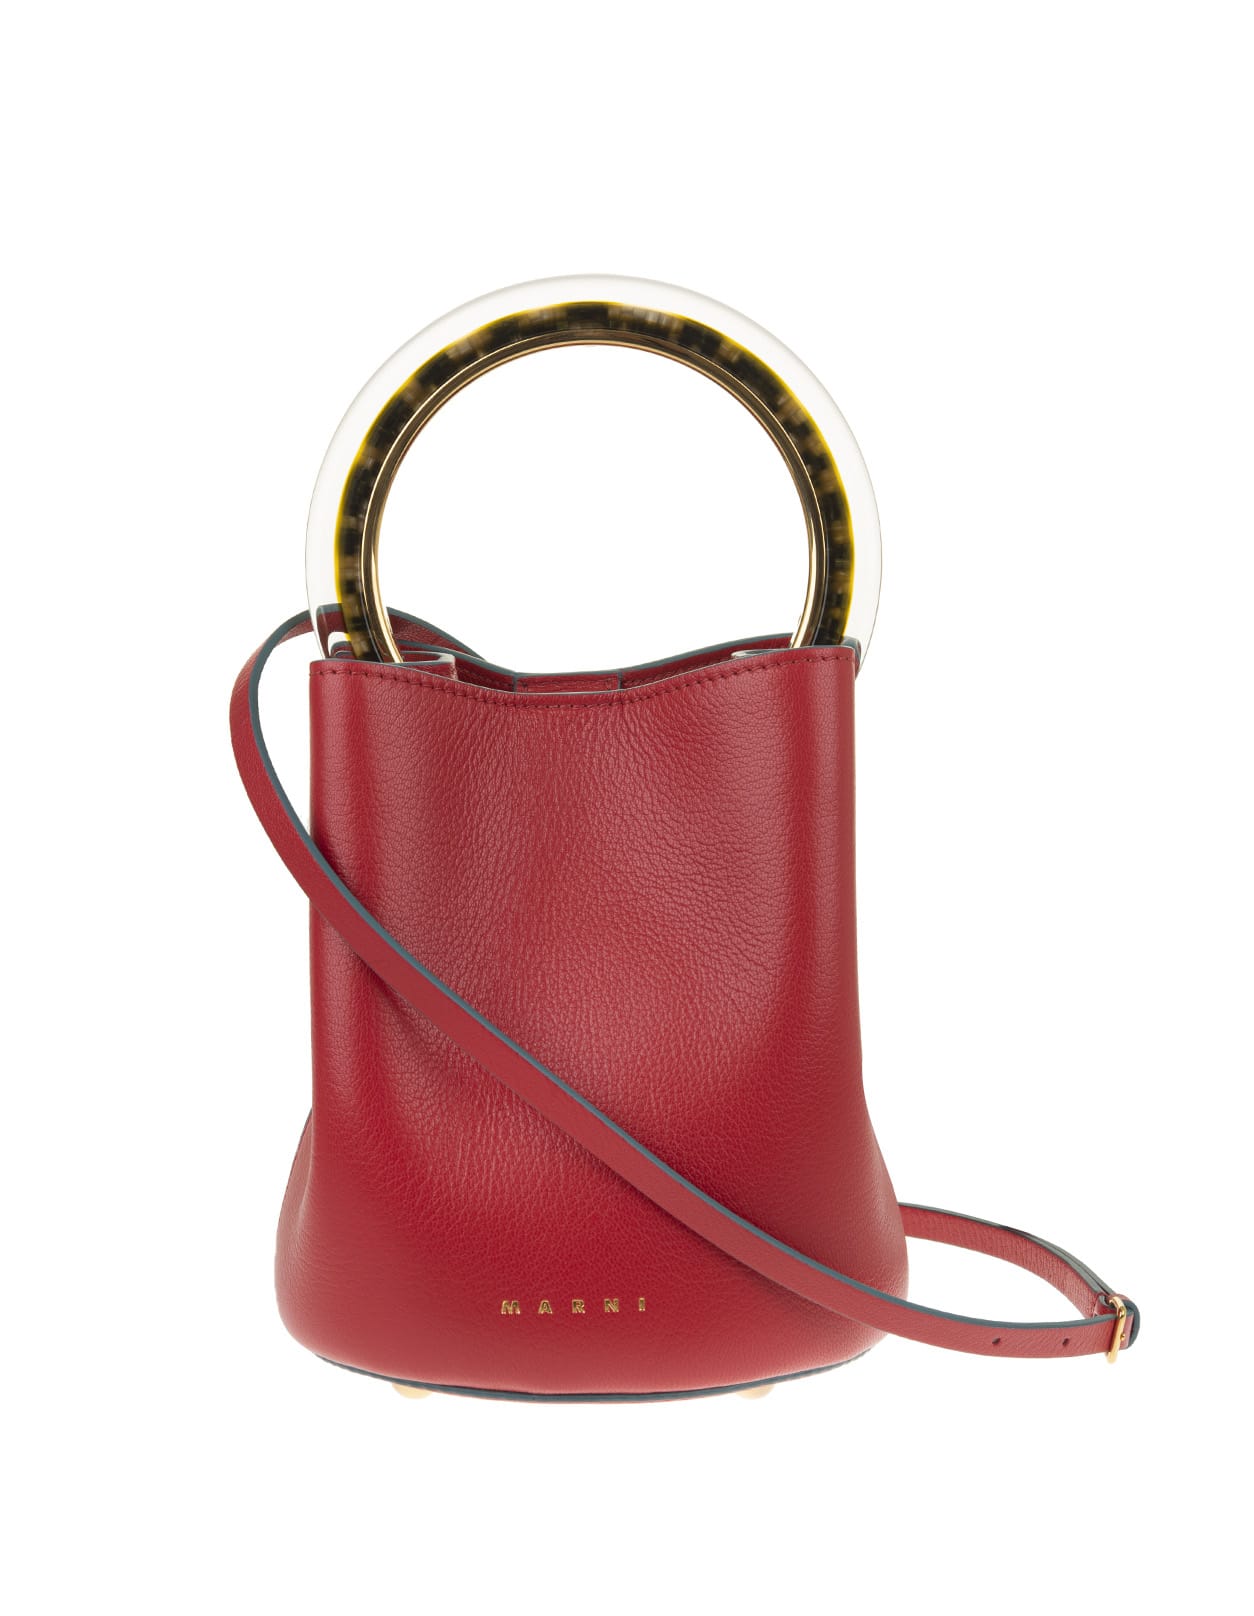 Marni Red Leather Tote Bag